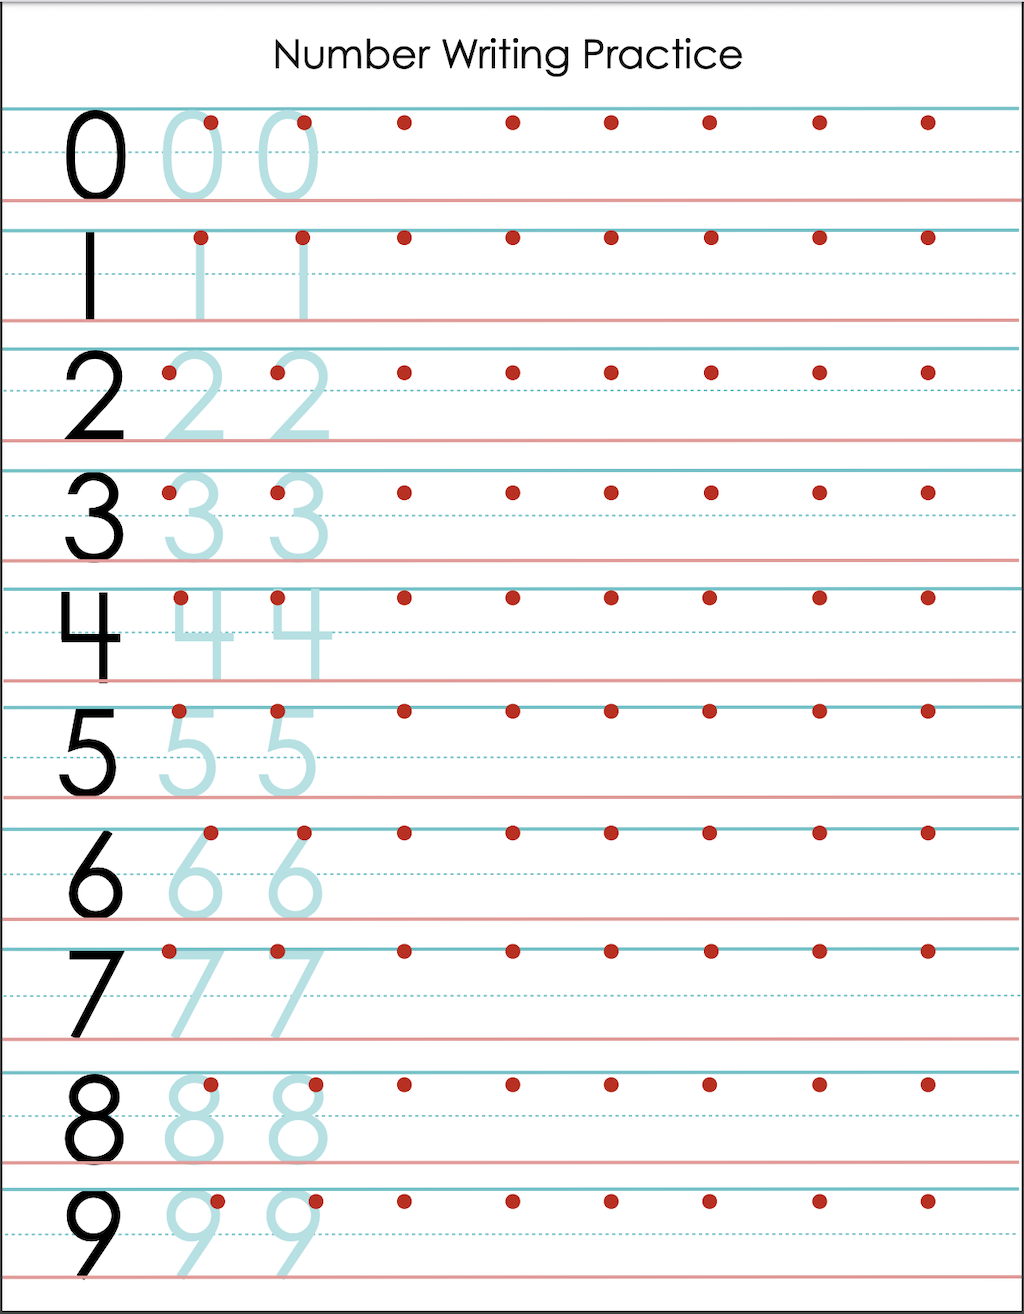 number-writing-practice-free-printable-each-free-printable-number-worksheets-includes-space-to